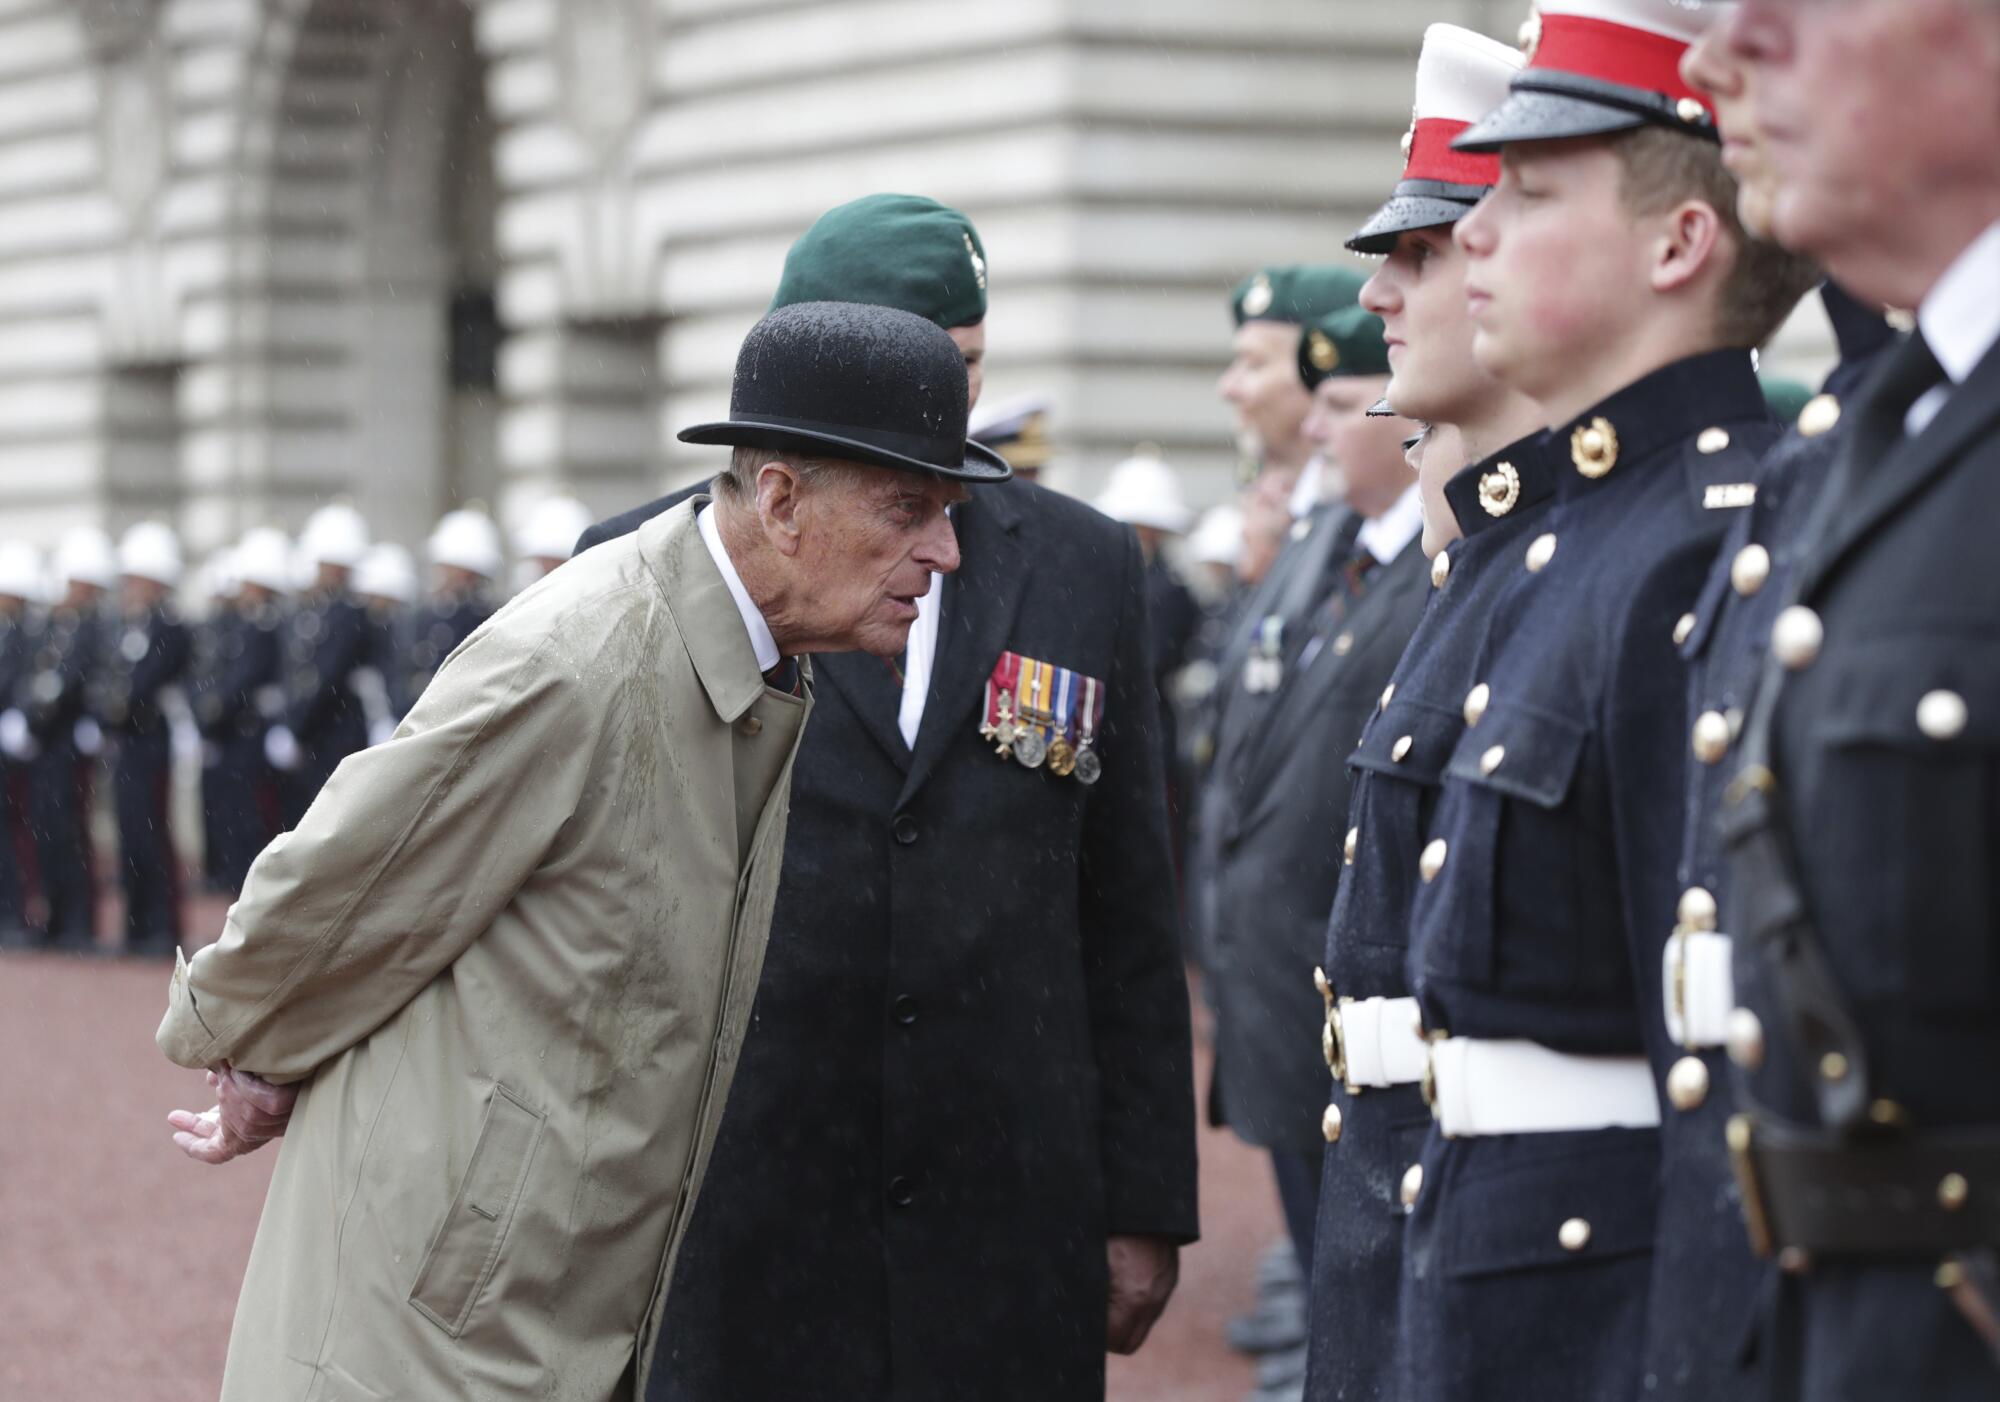 Prince Philip, in his role as Captain-General of the Royal Marines, talks to uniformed troops.